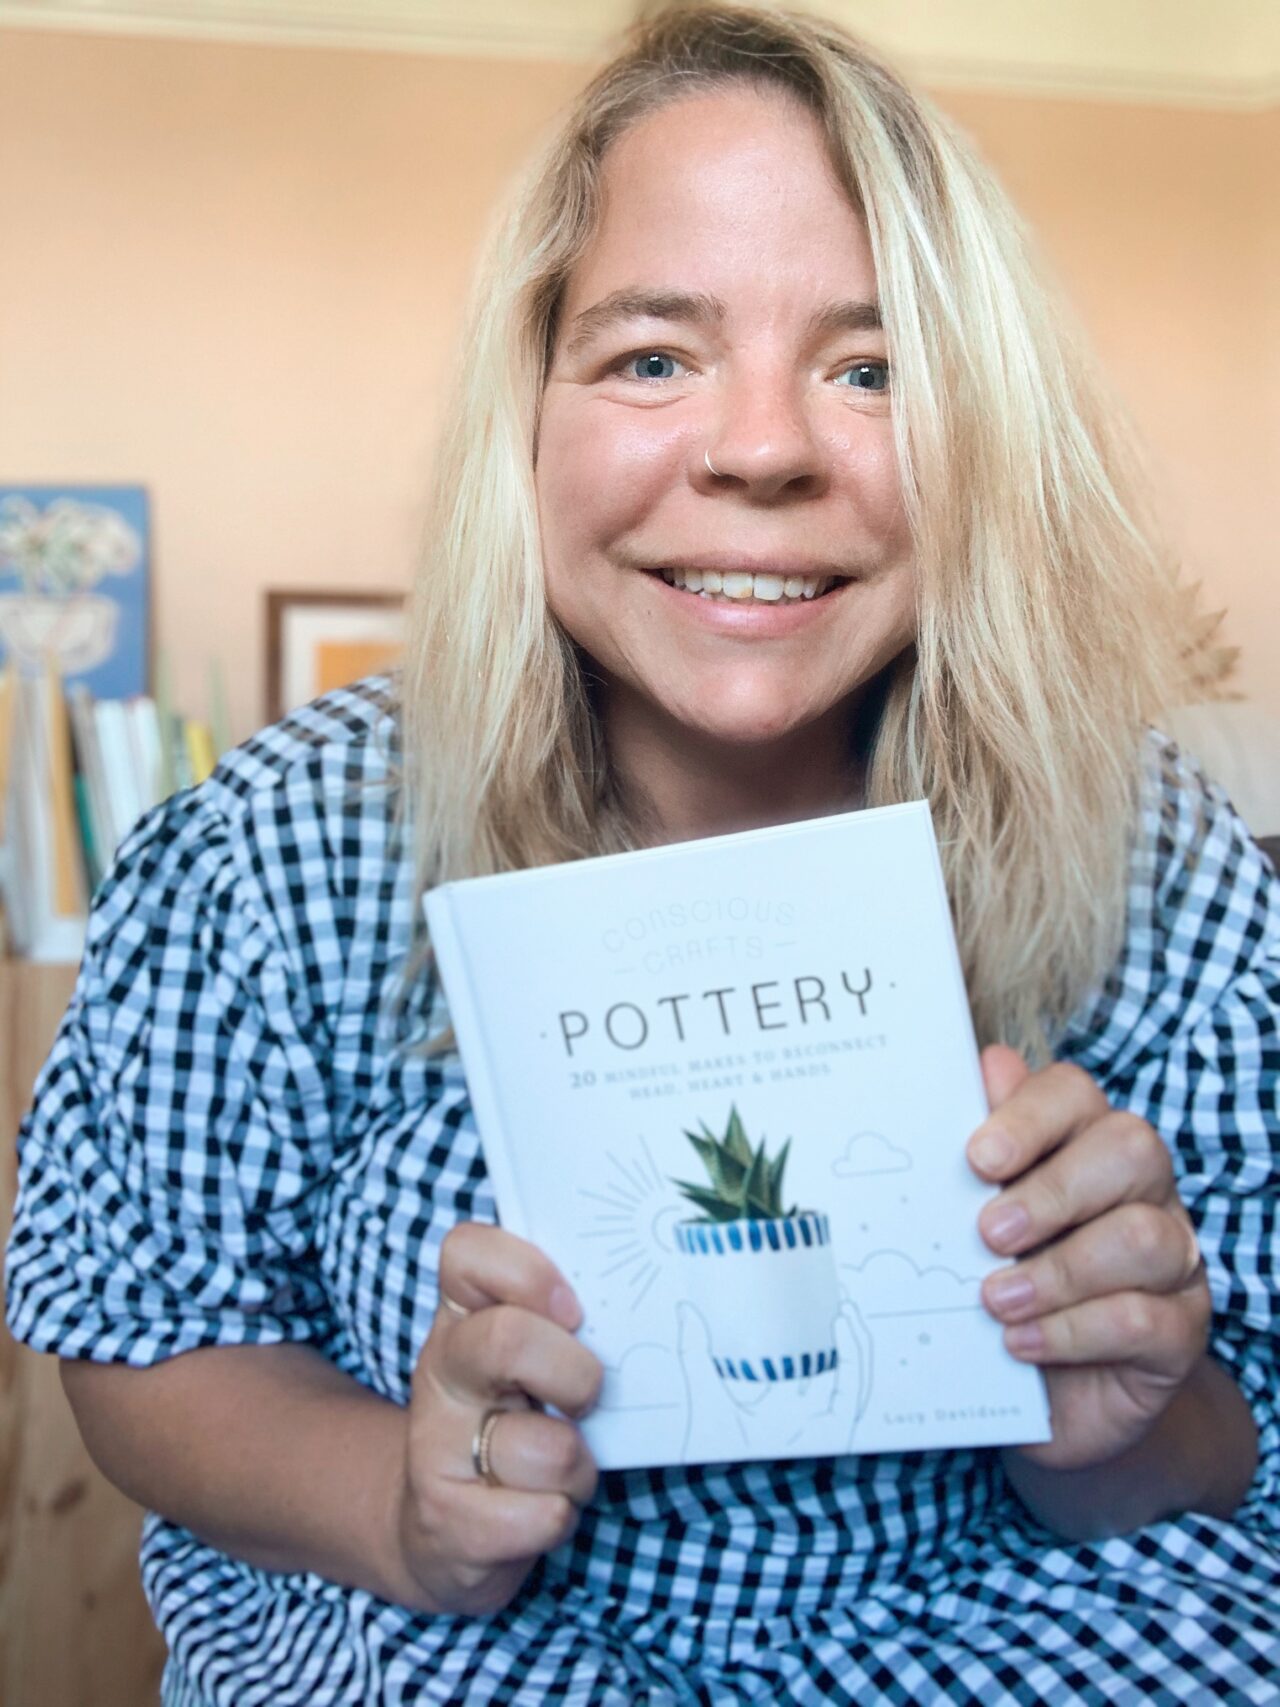 Lucy Rowan holding her book on pottery